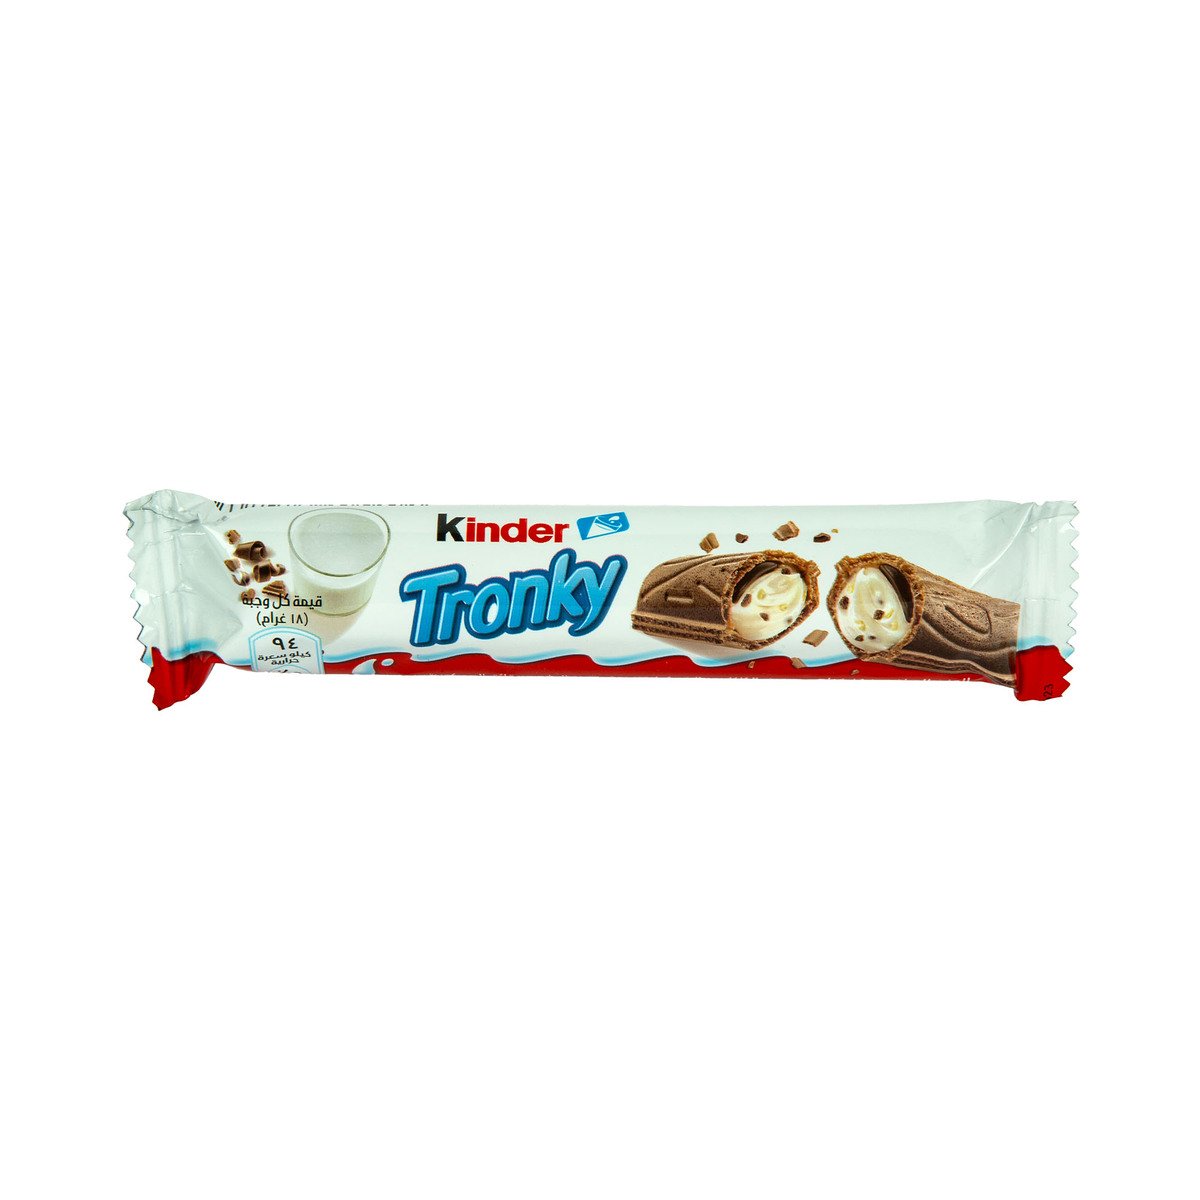 Kinder Tronky Cocoa Wafer Biscuit 18 g